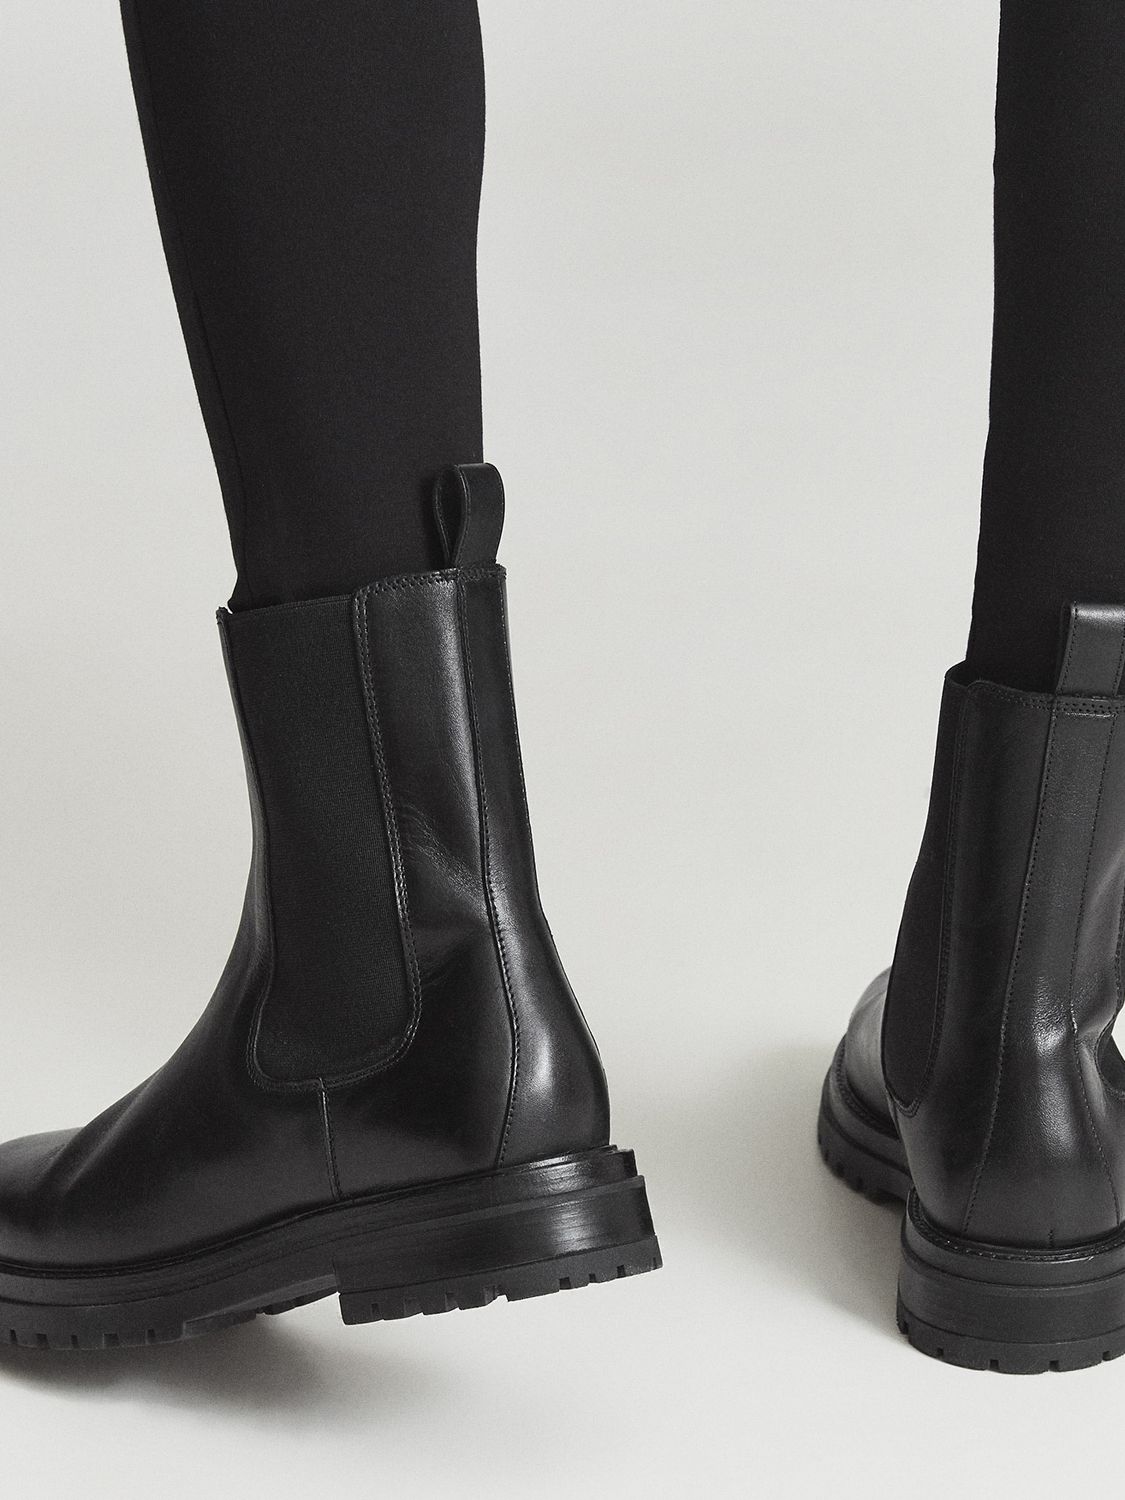 Reiss Thea Leather Chelsea Boots, Black at John Lewis & Partners